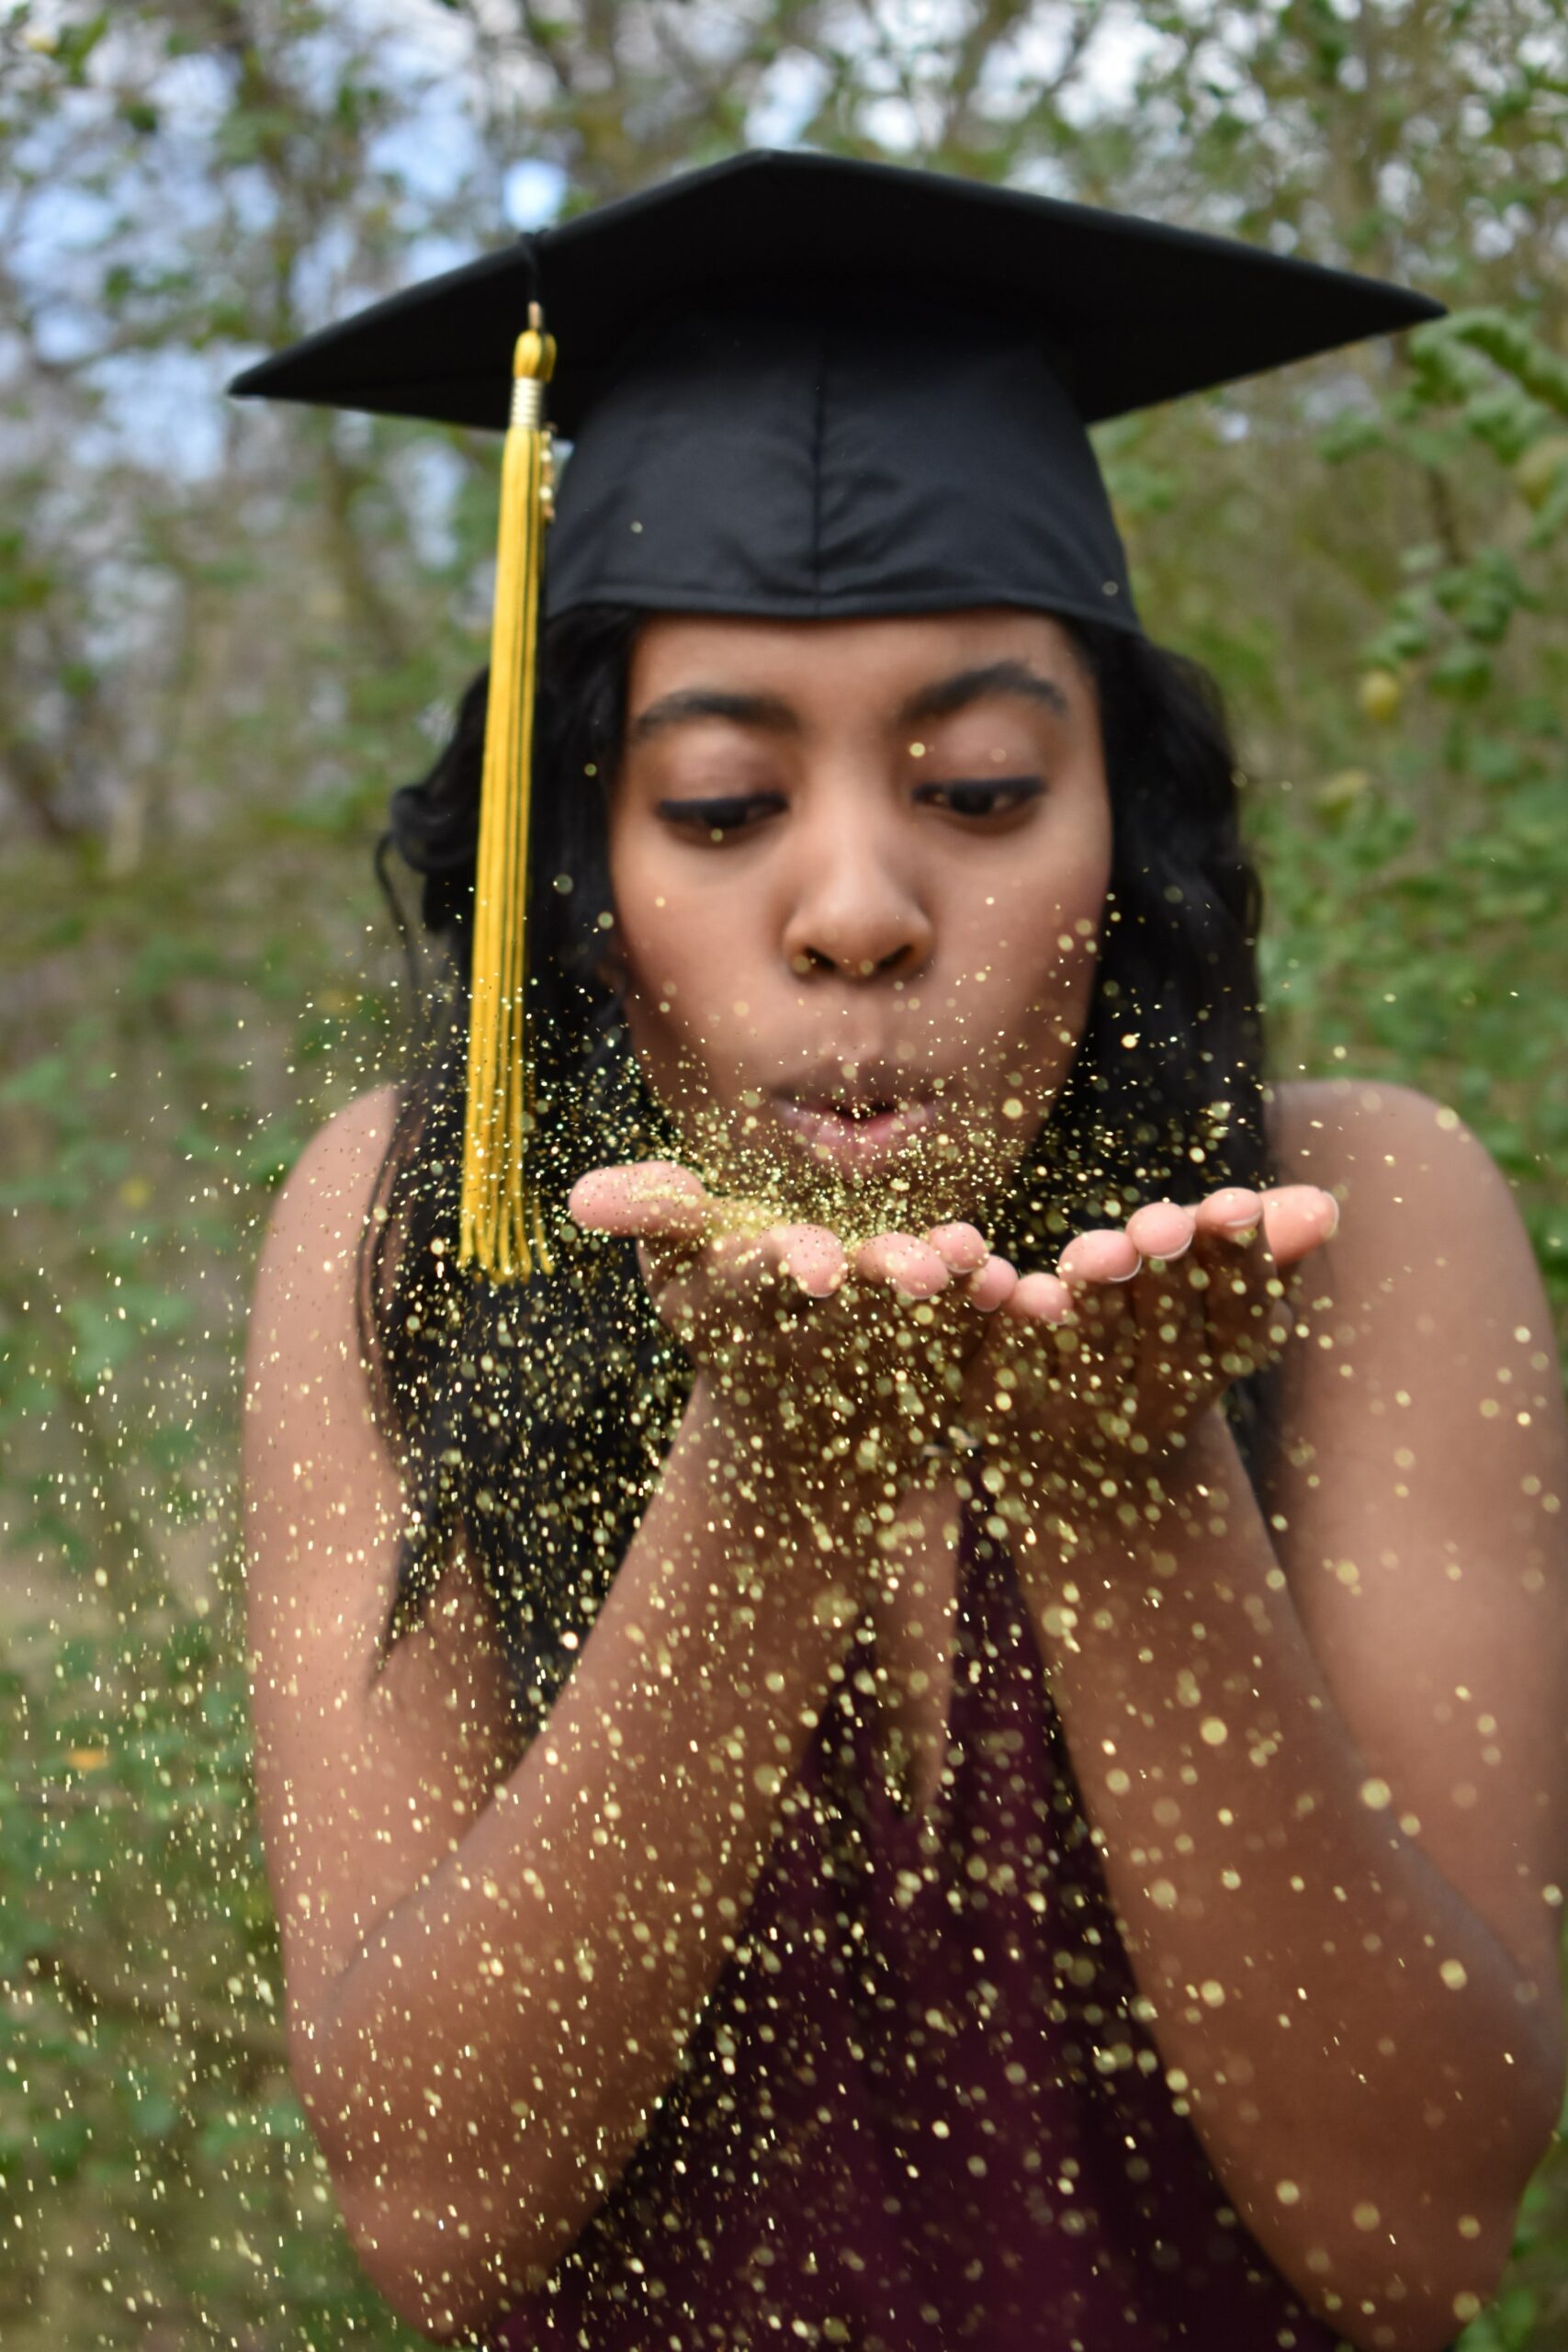 A black woman wearing a graduation cap celebrating by blowing glitter from her hands into the air.